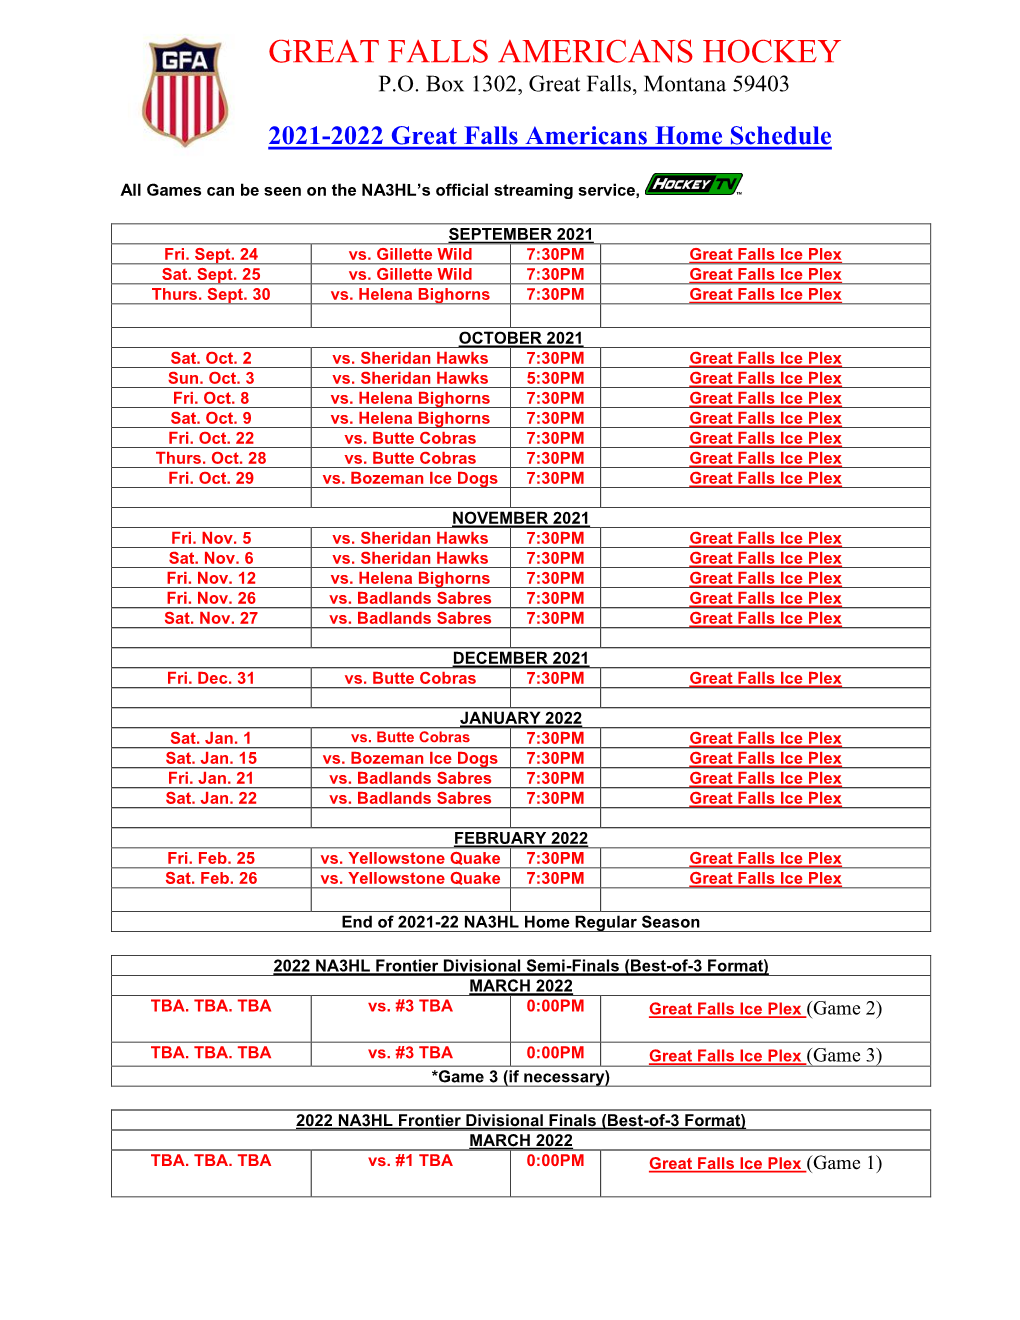 2021-22 Great Falls Americans Home Game Schedule